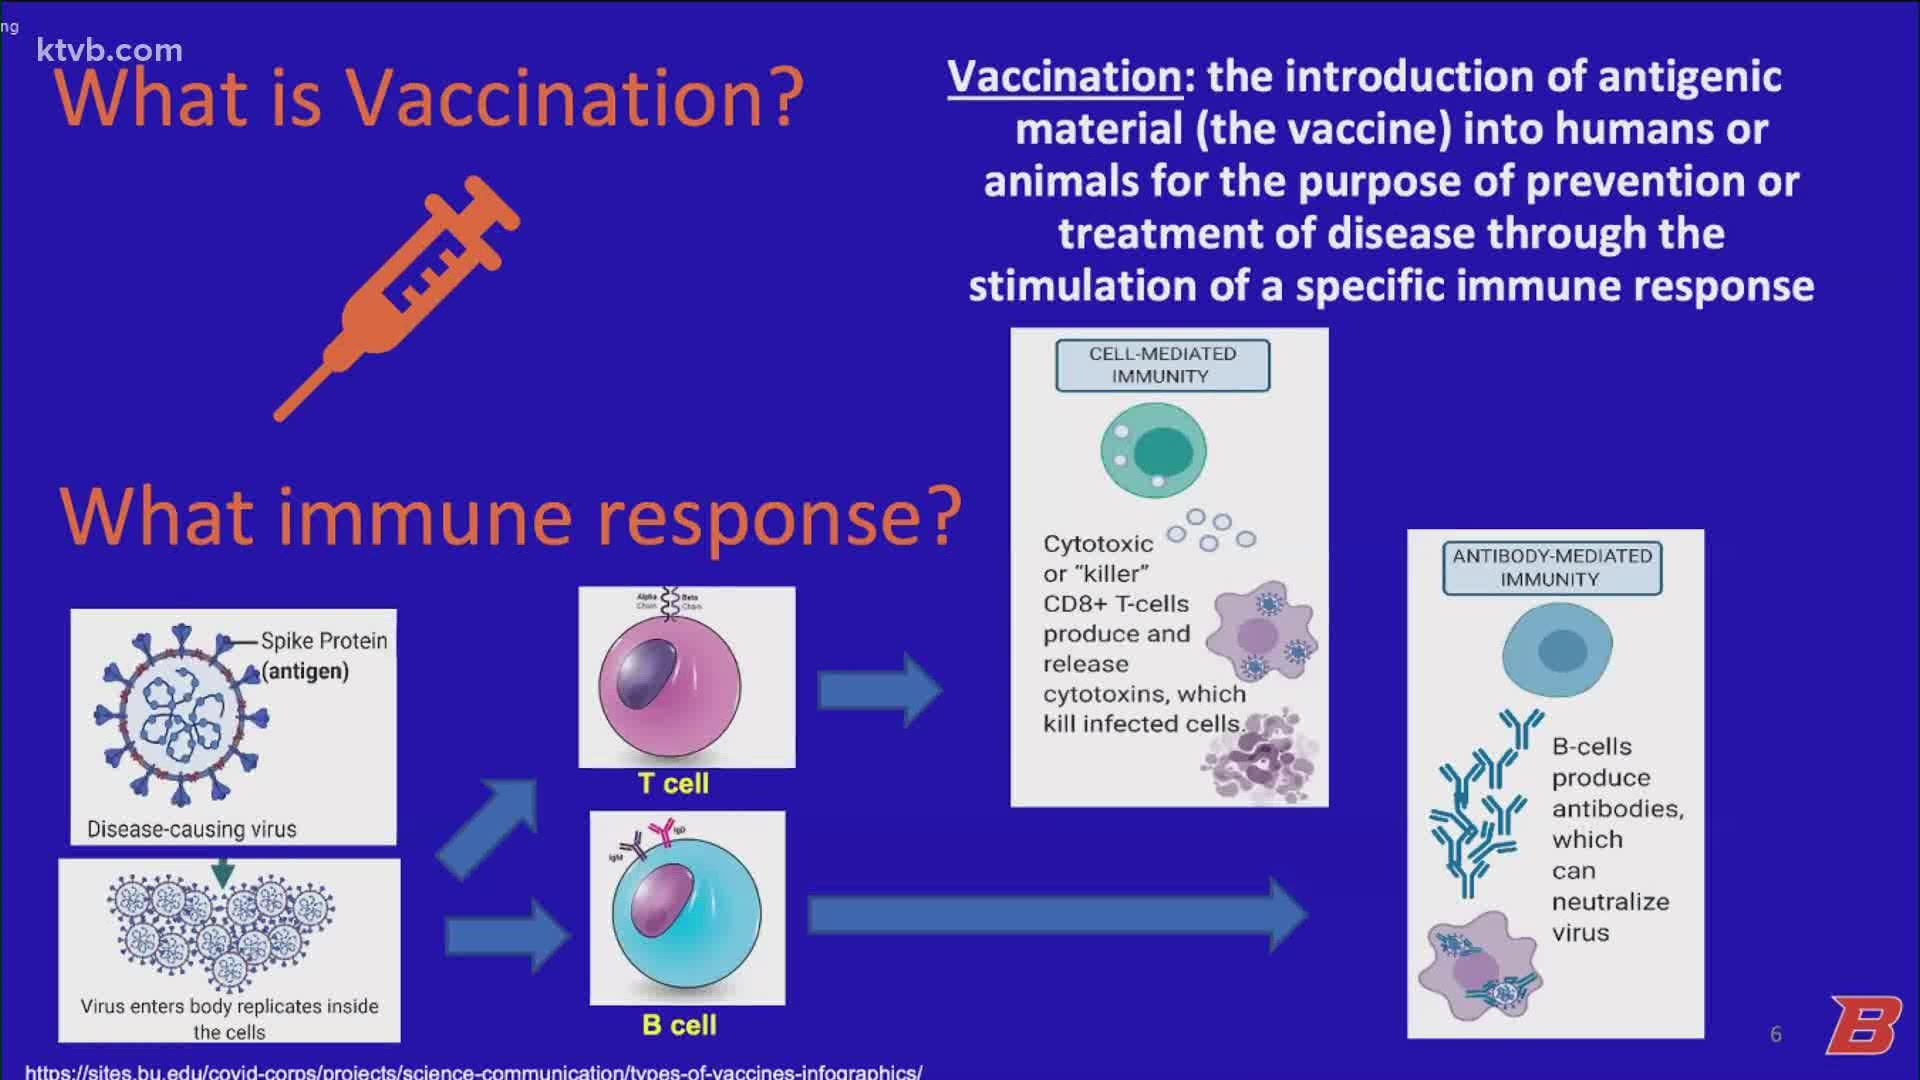 On Tuesday afternoon, a group of Boise State University students held a webinar to address common questions and concerns about the COVID-19 vaccines.